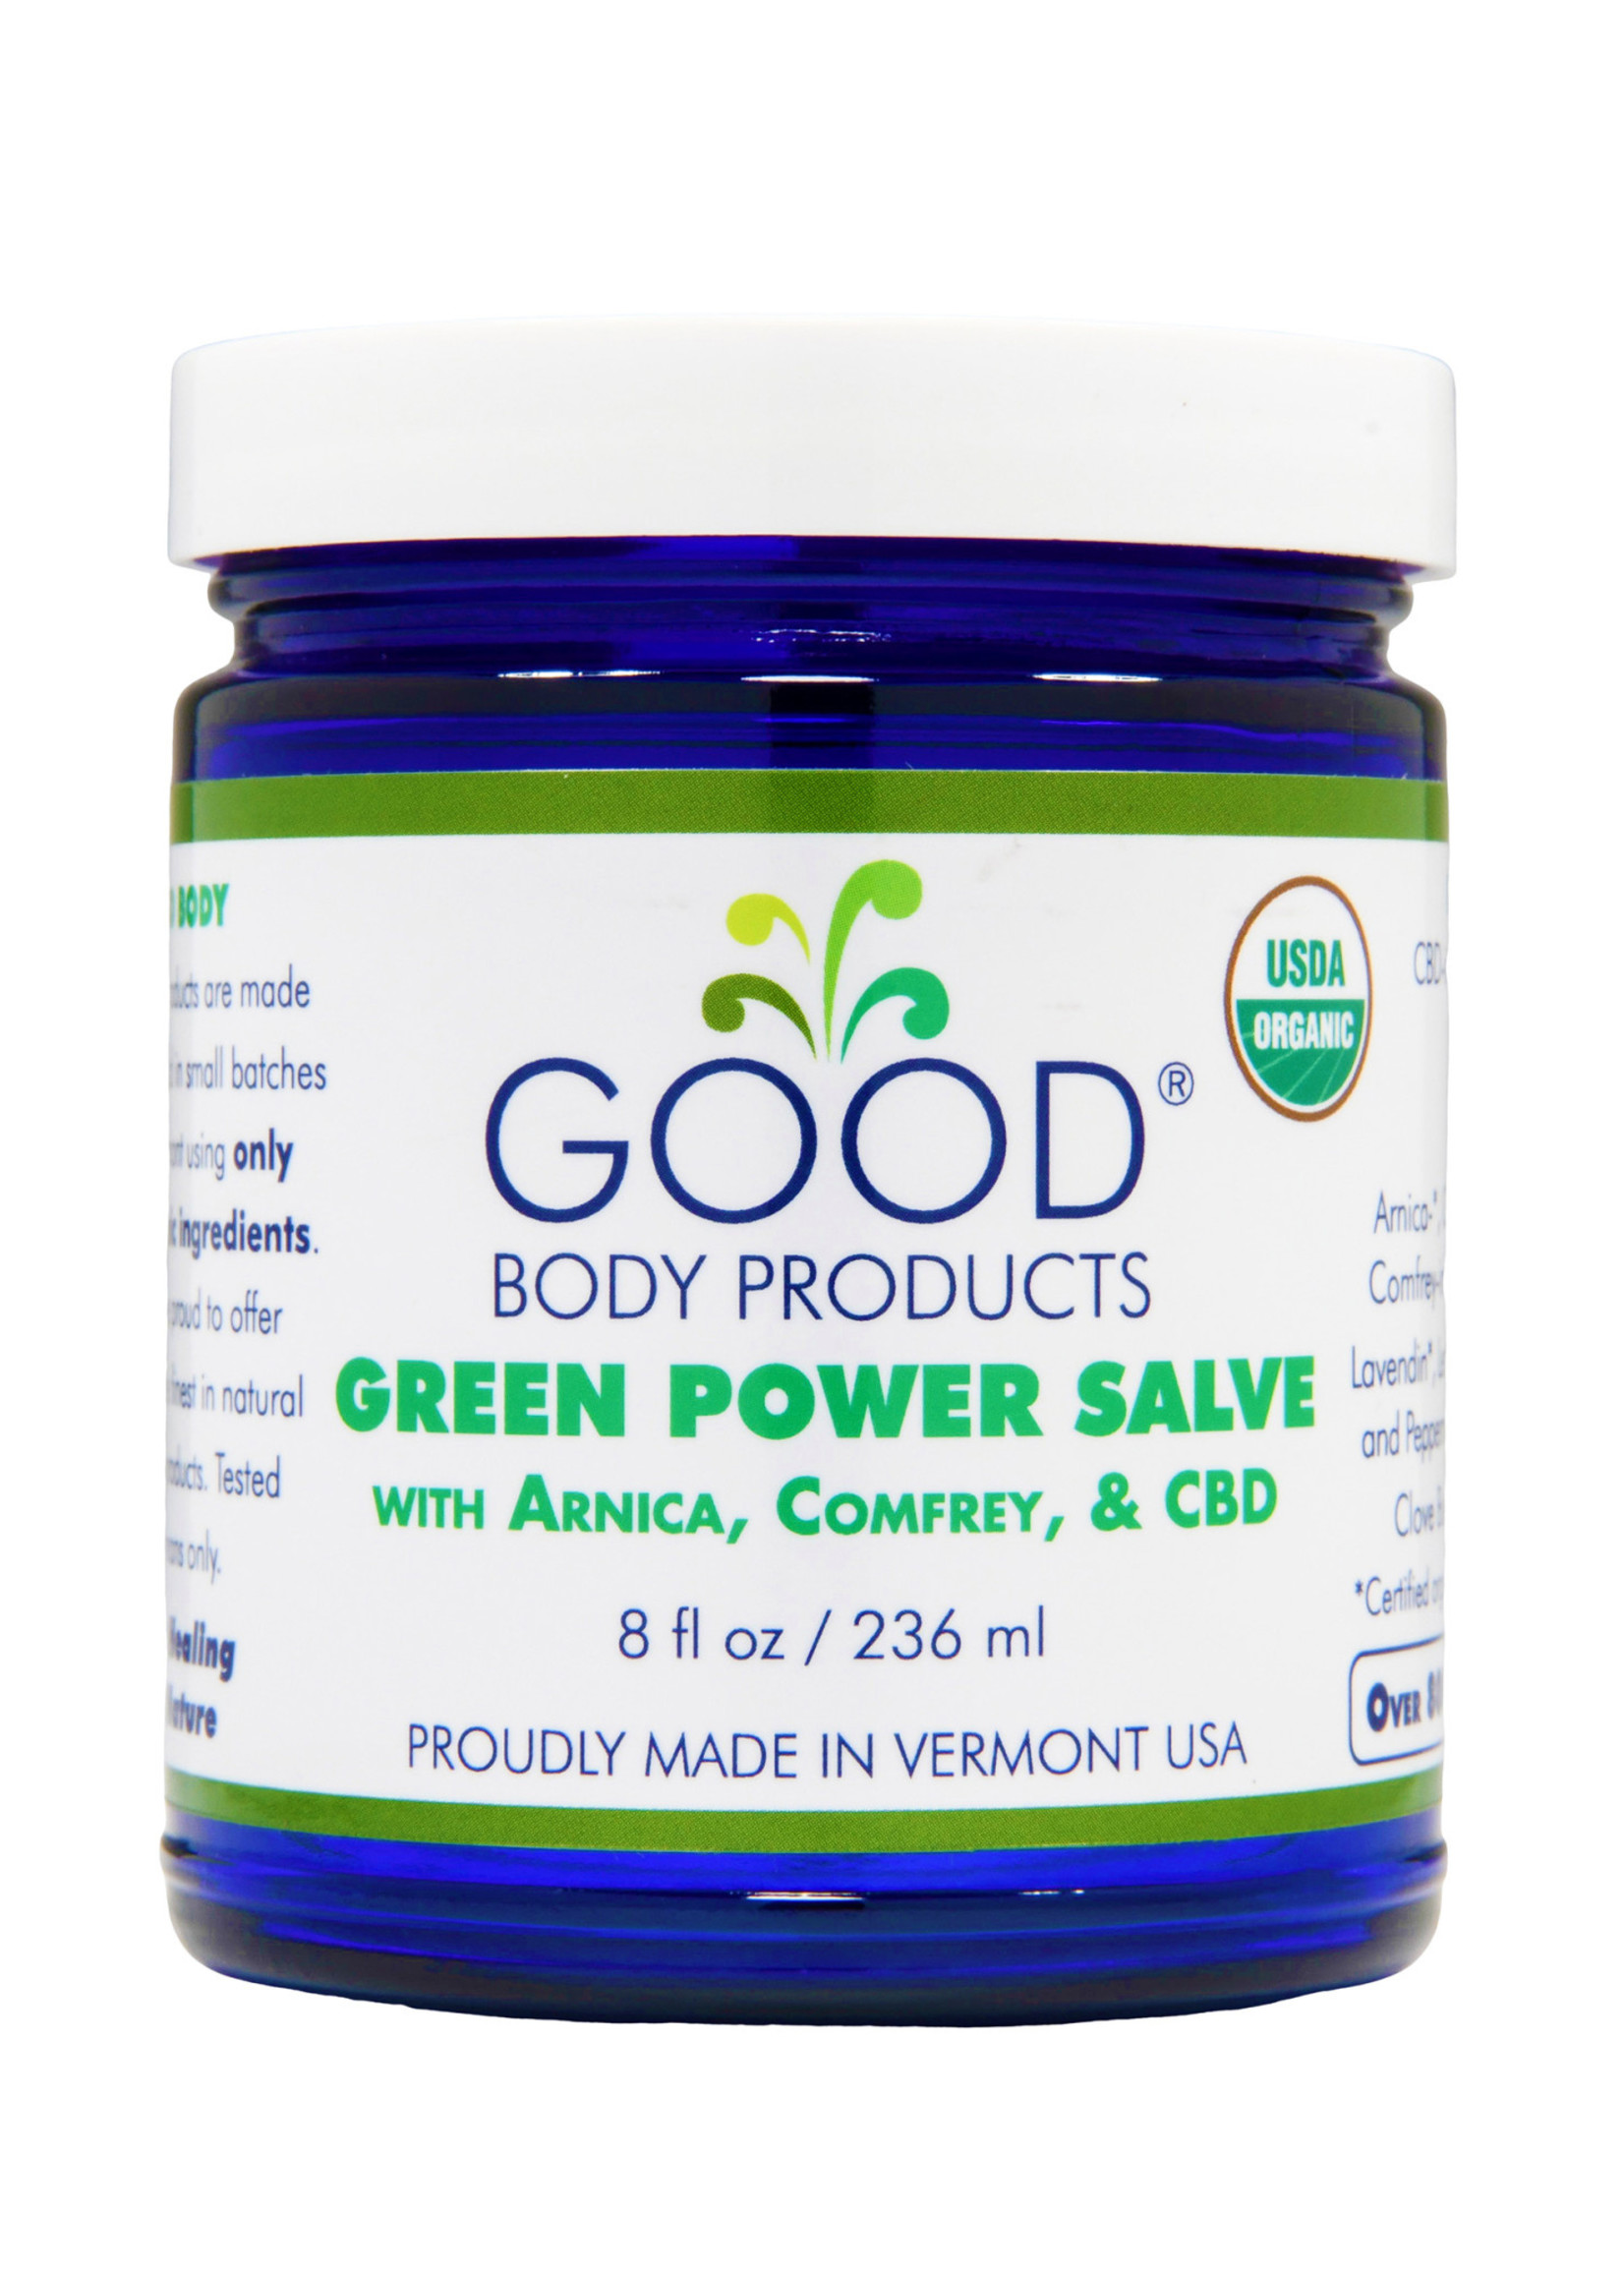 Good Body Products GBP, Green Power Salve PRO with Arnica, Comfrey, and CBD, 8oz